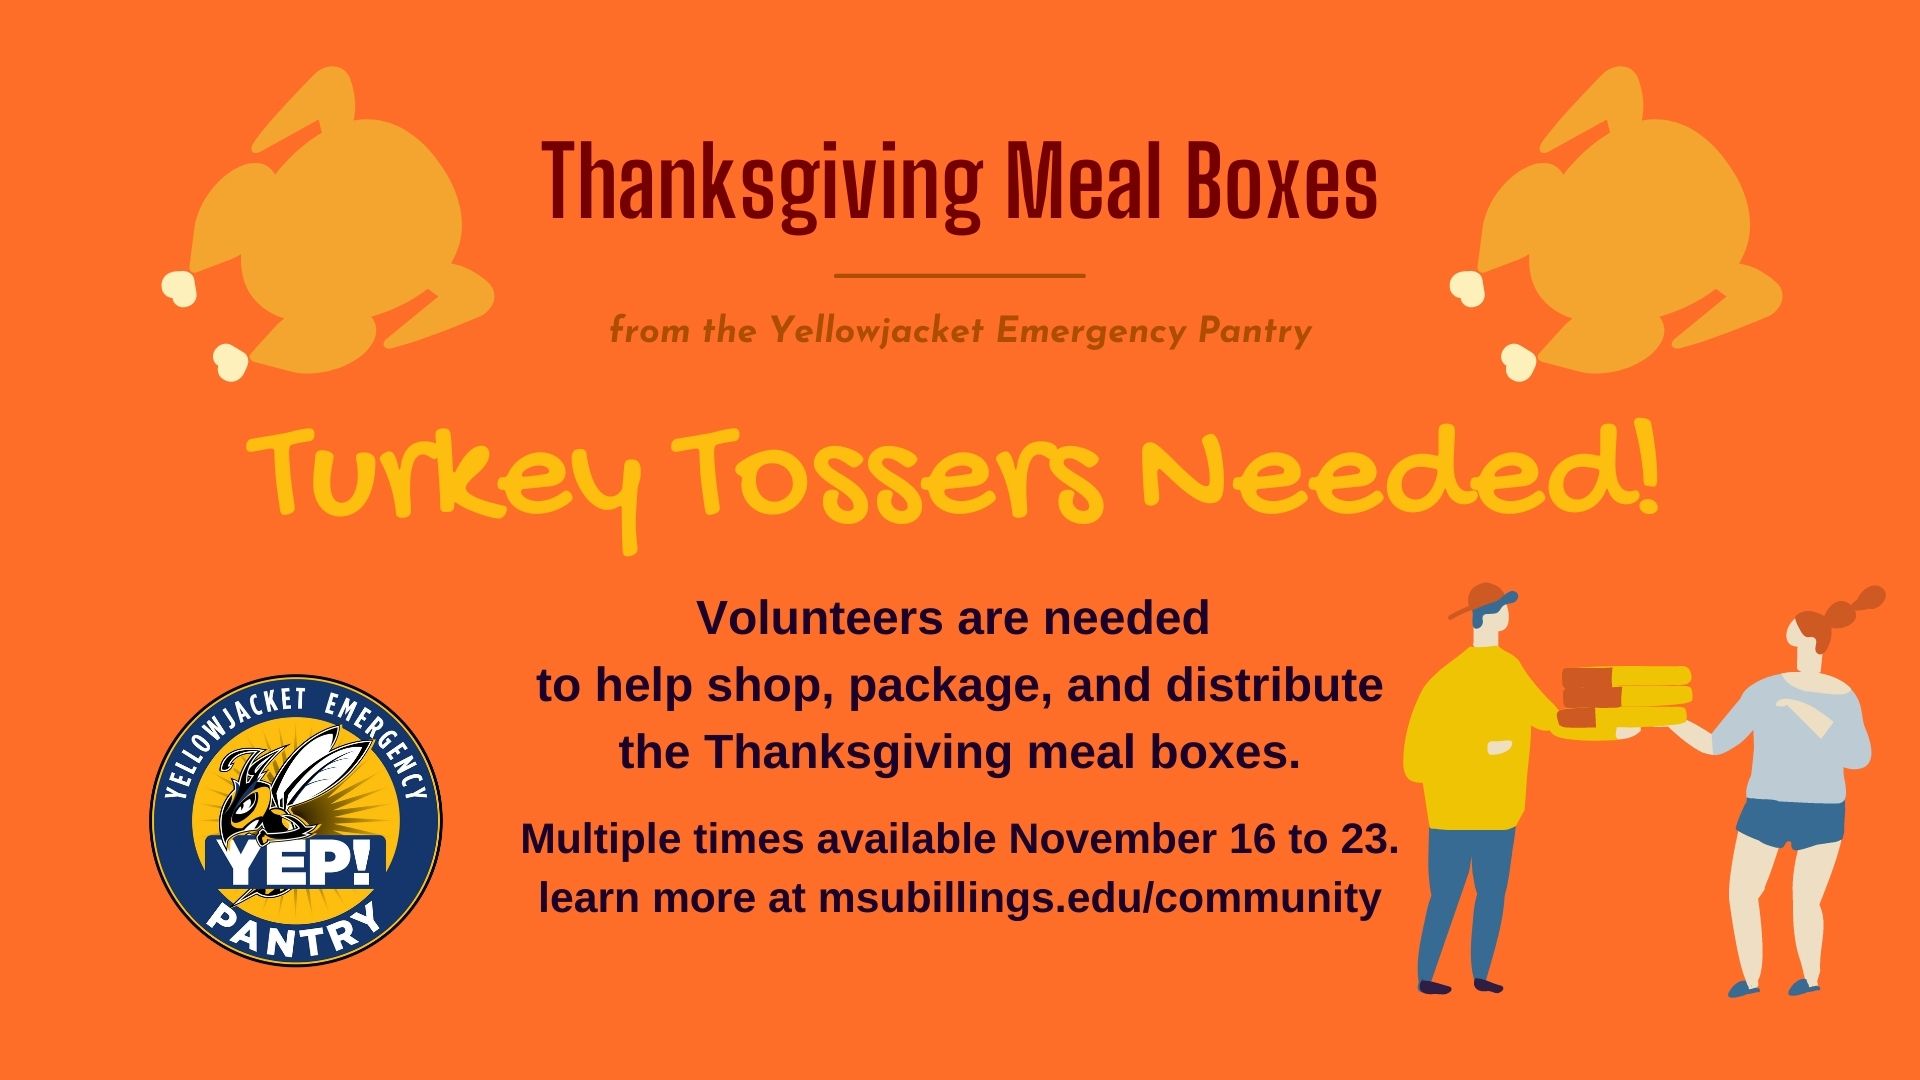 Thanksgiving Meal Boxes from the Yellowjacket Emergency Pantry. Turkey Tossers Needed! Volunteers are needed to help shop, package, and distribute the Thanksgiving meal boxes. Multiple times available November 16 to 23.